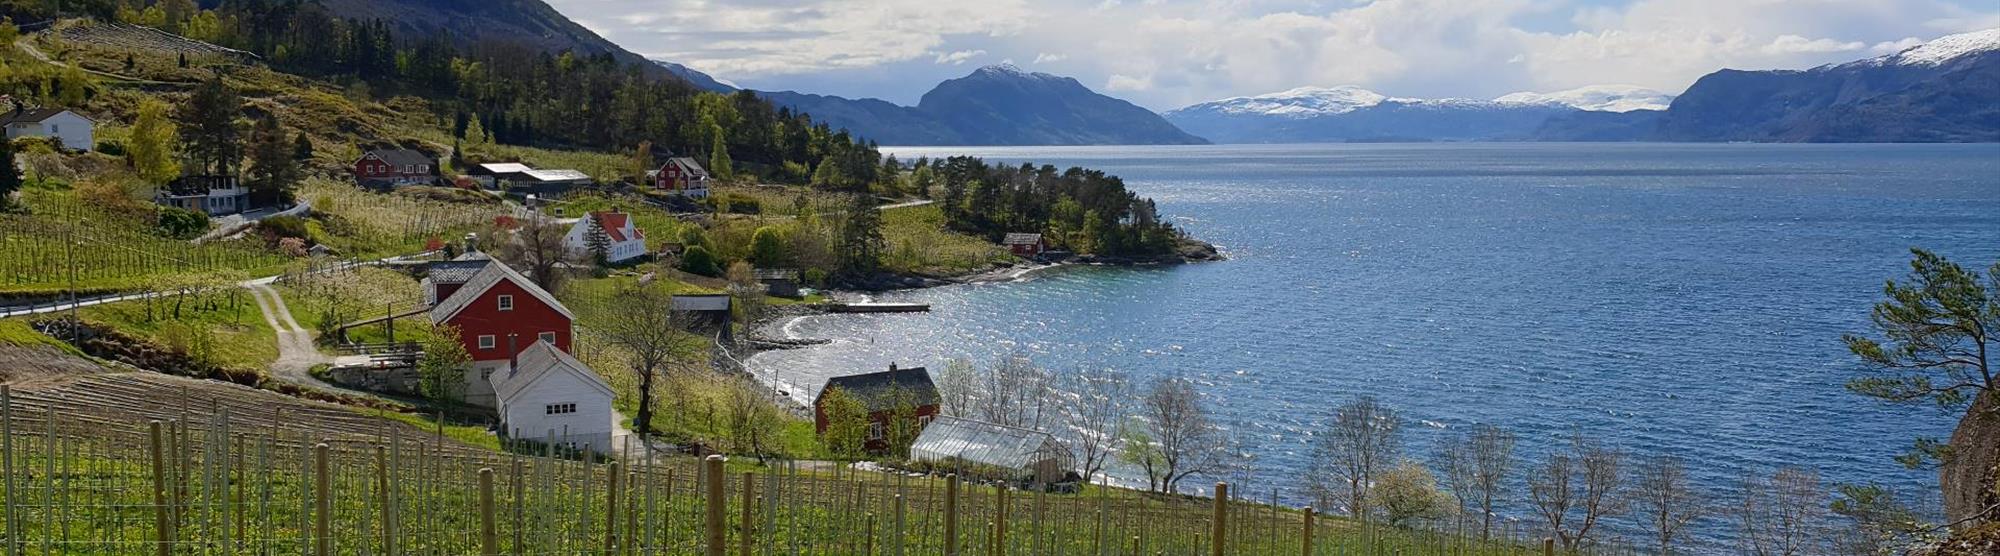 The "champagne" of apple cider comes from Hardanger